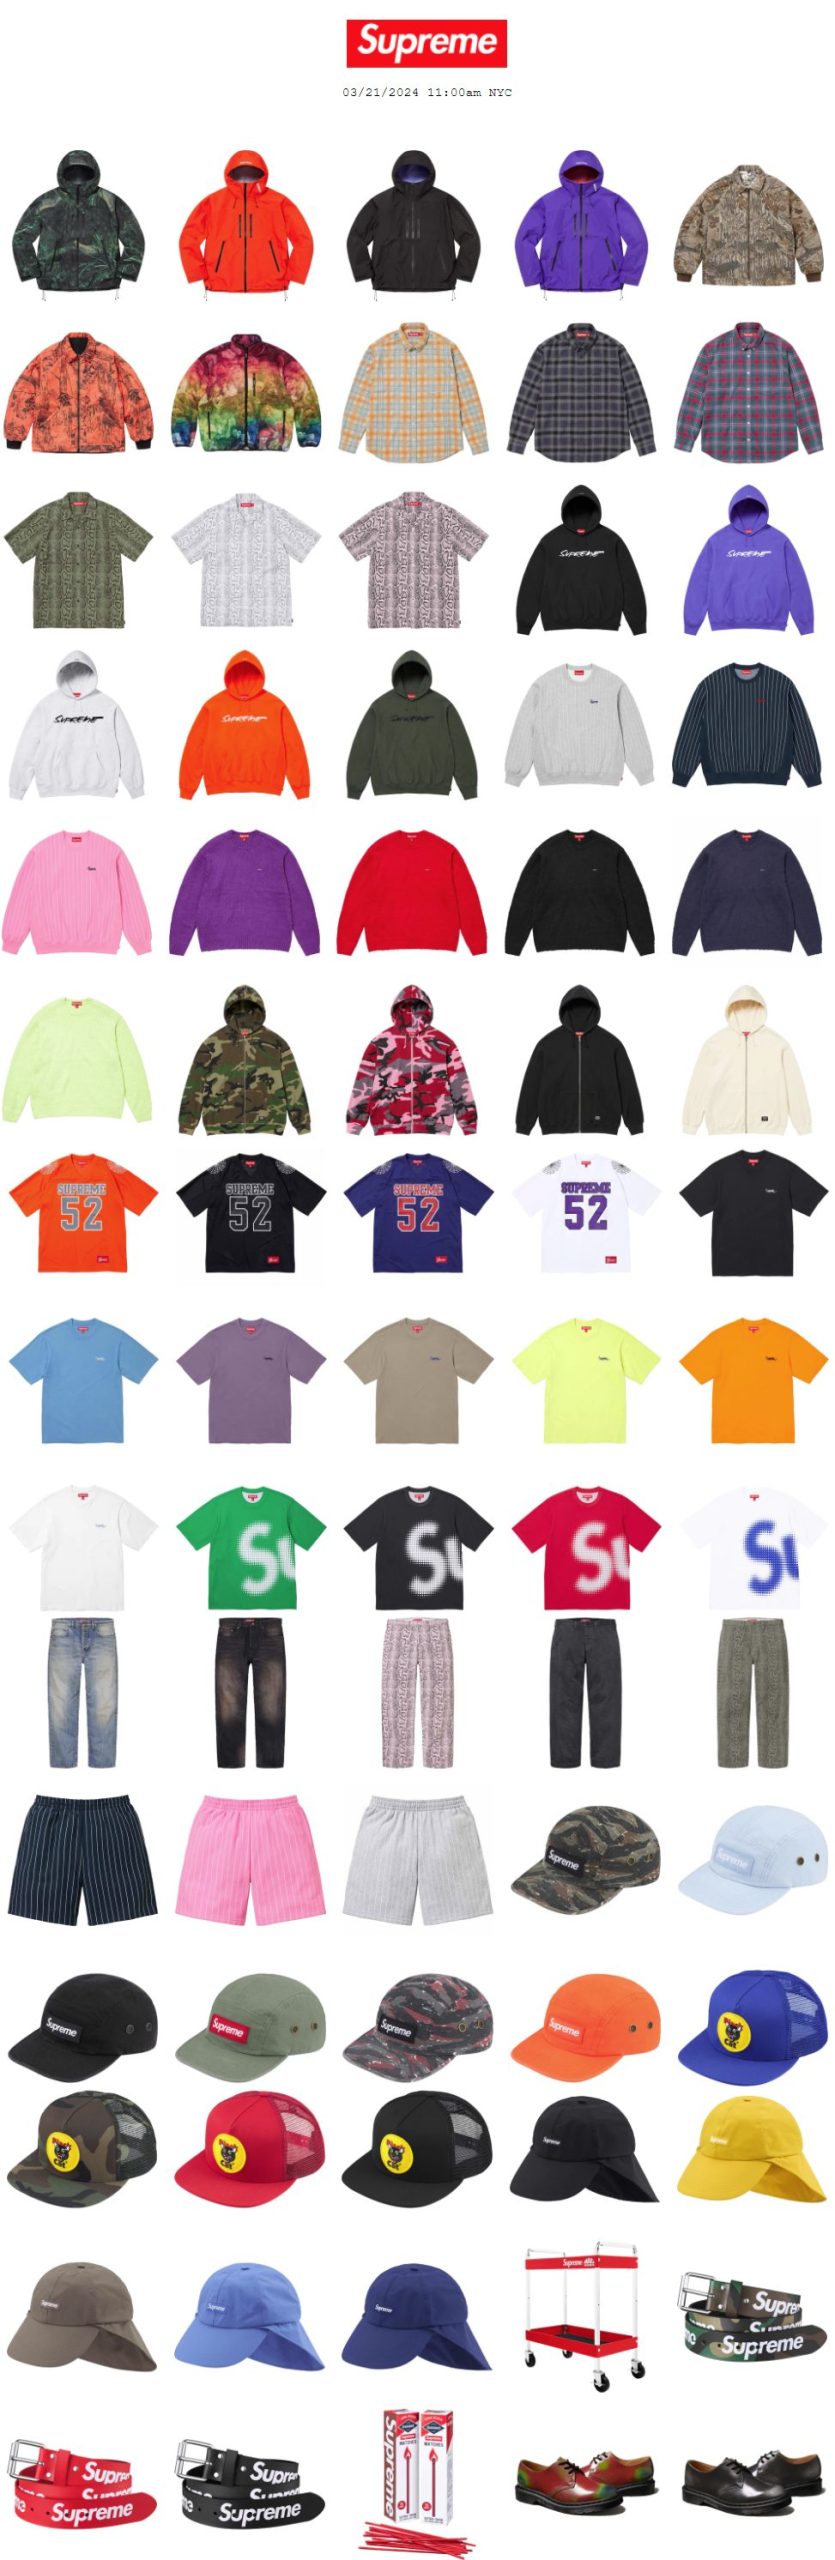 Supreme 公式通販サイトで3月23日 Week6に発売予定の24SS 新作アイテム ...